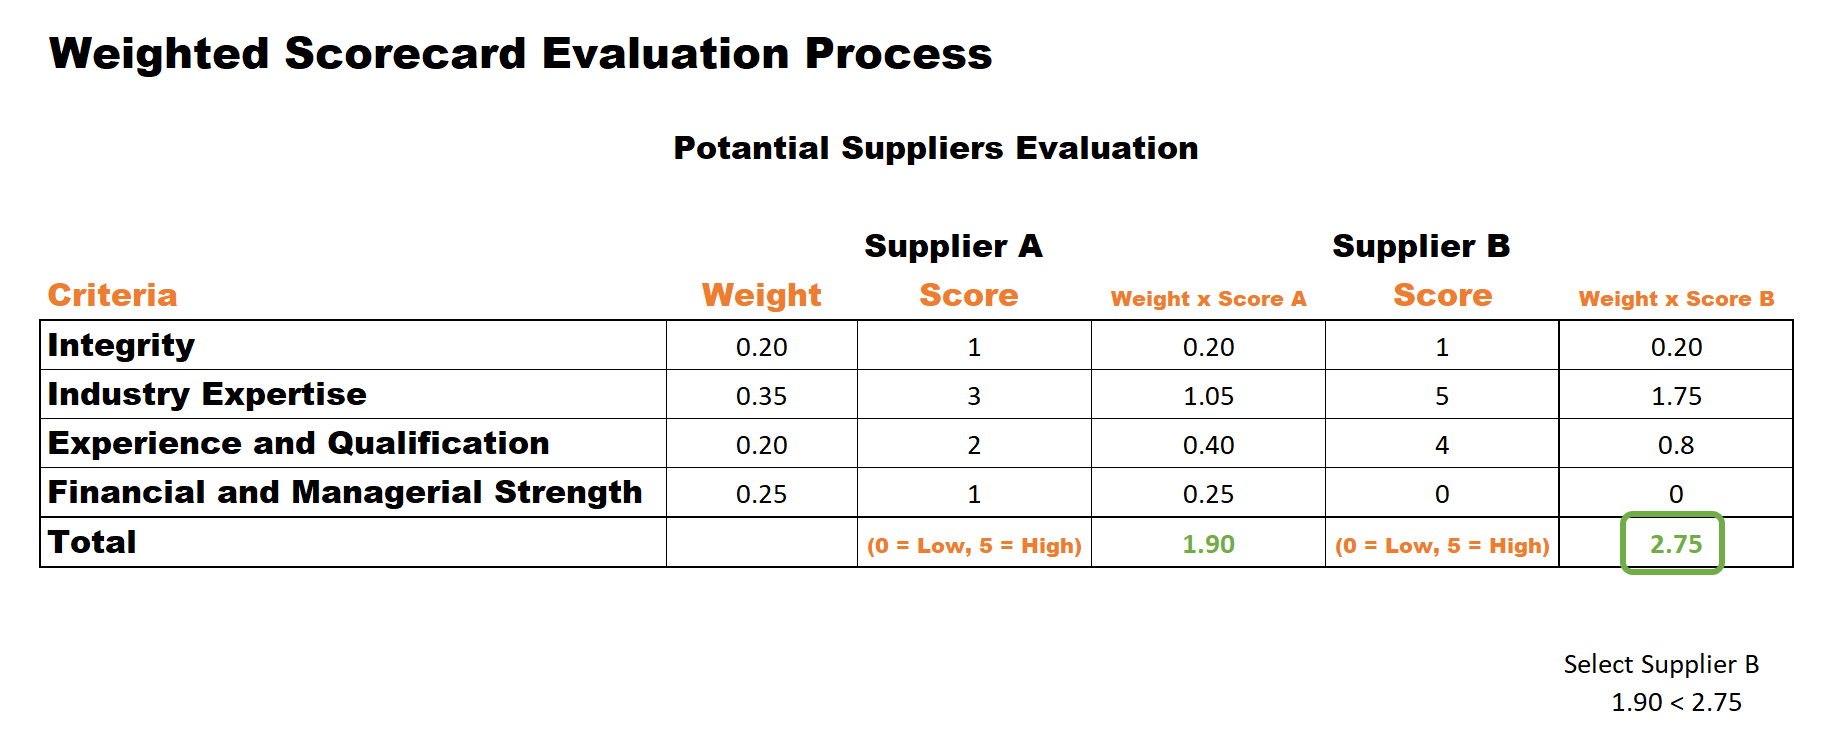 Weighted Scorecard Evaluation Process. Image description available at the end of this chapter.